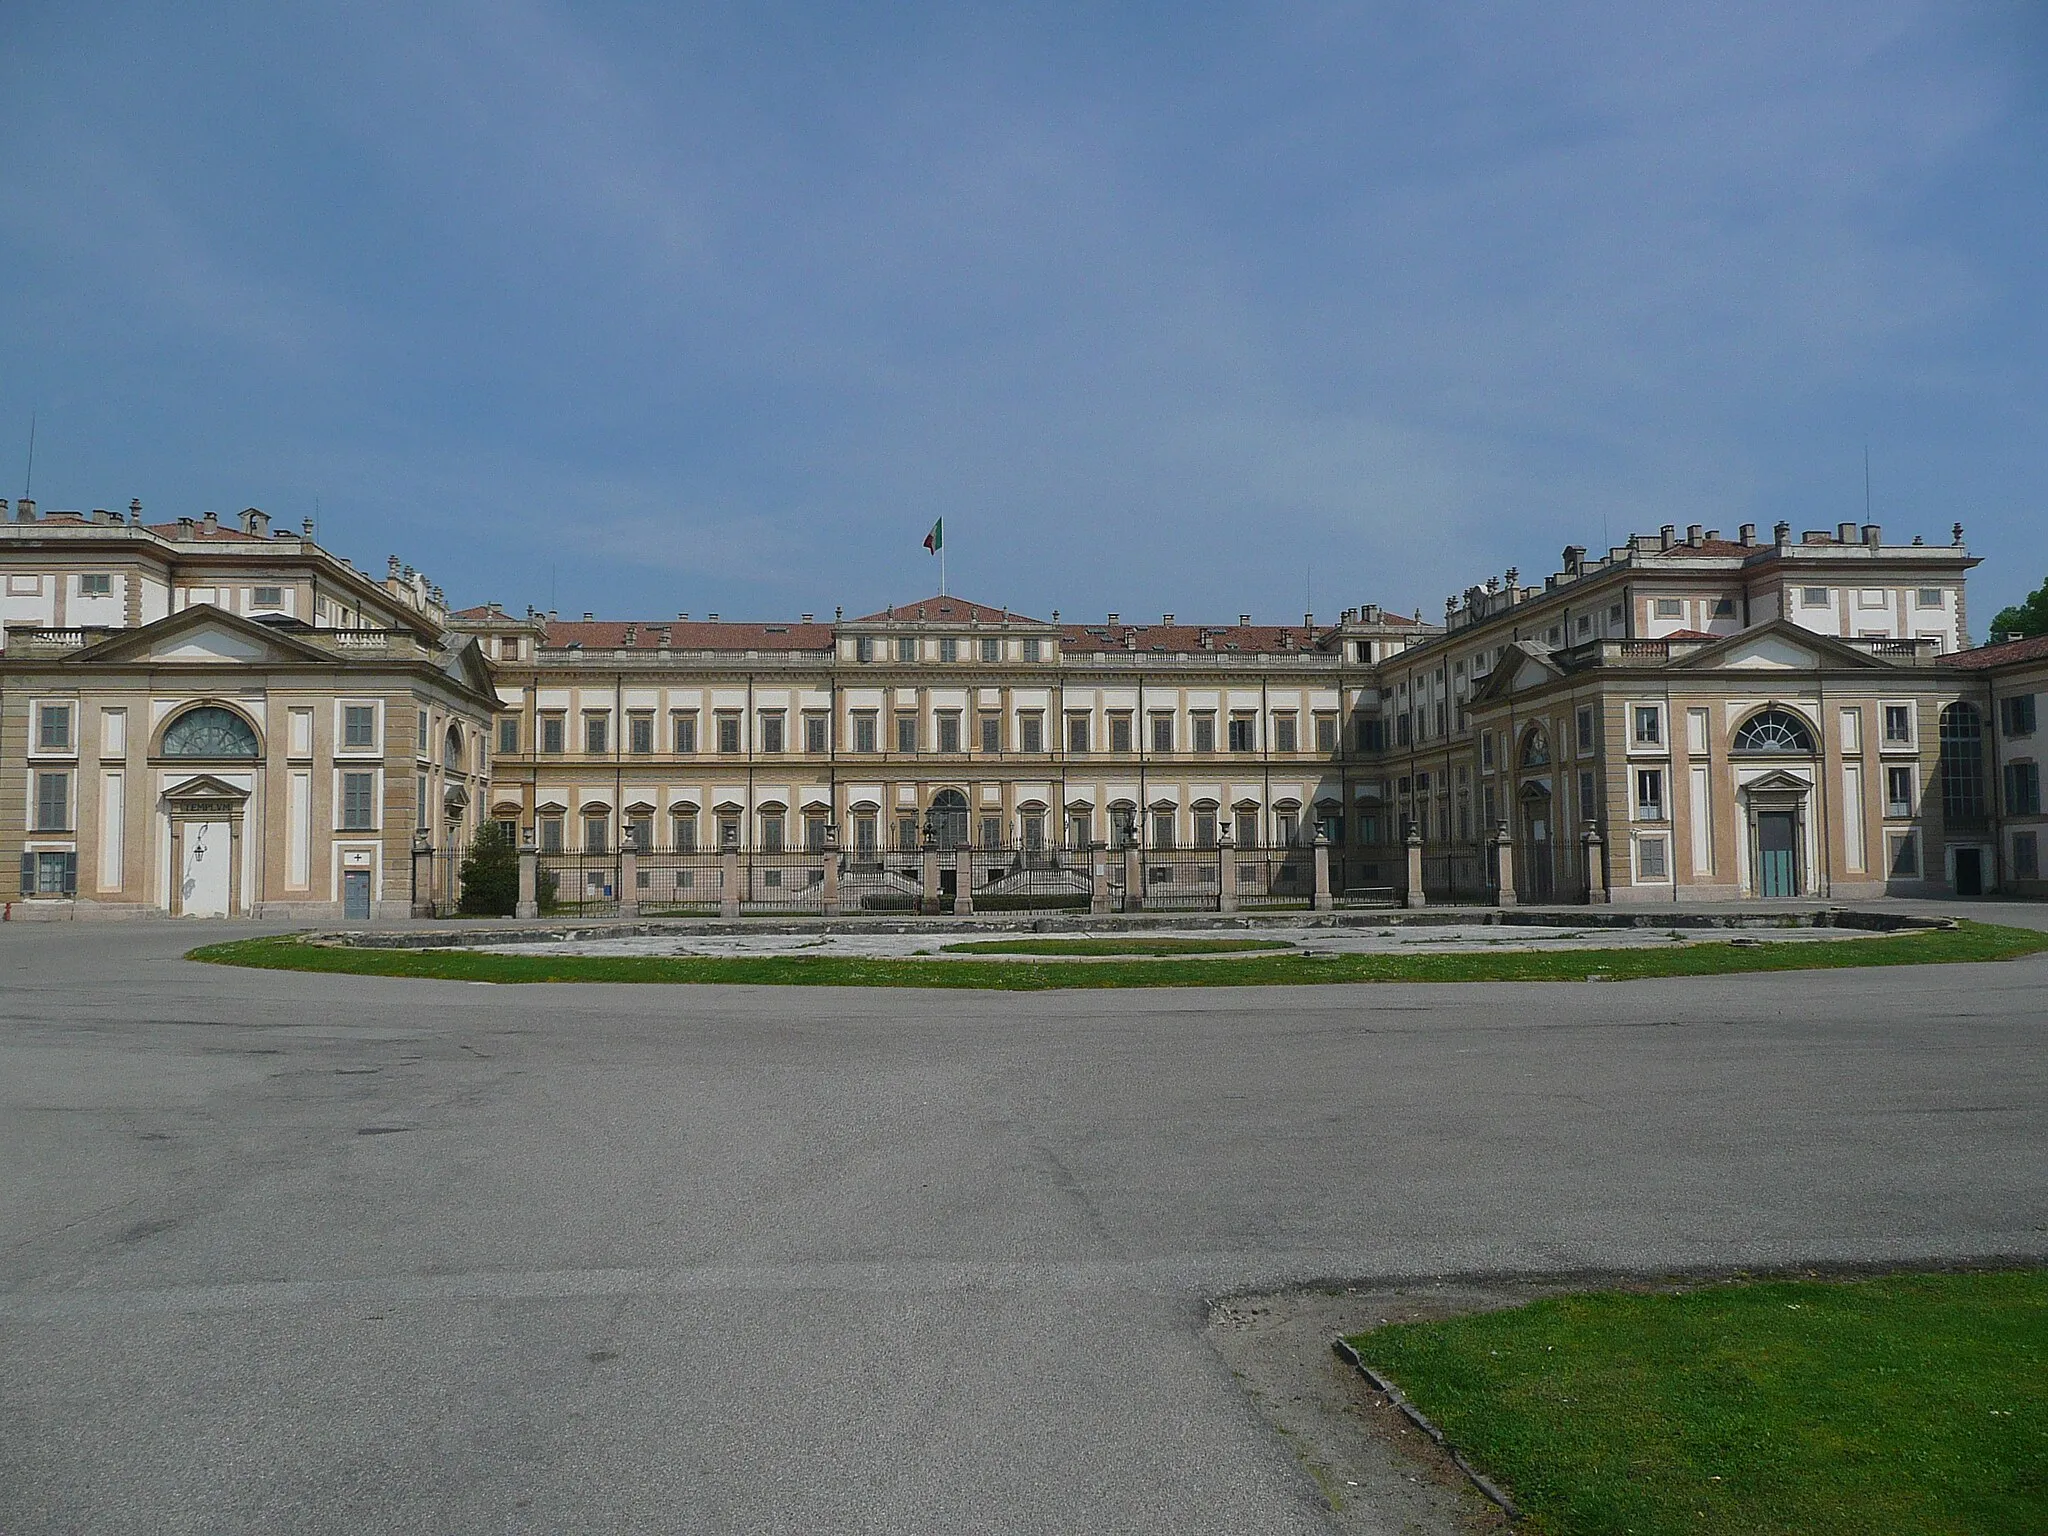 Photo showing: villa reale, monza, italy